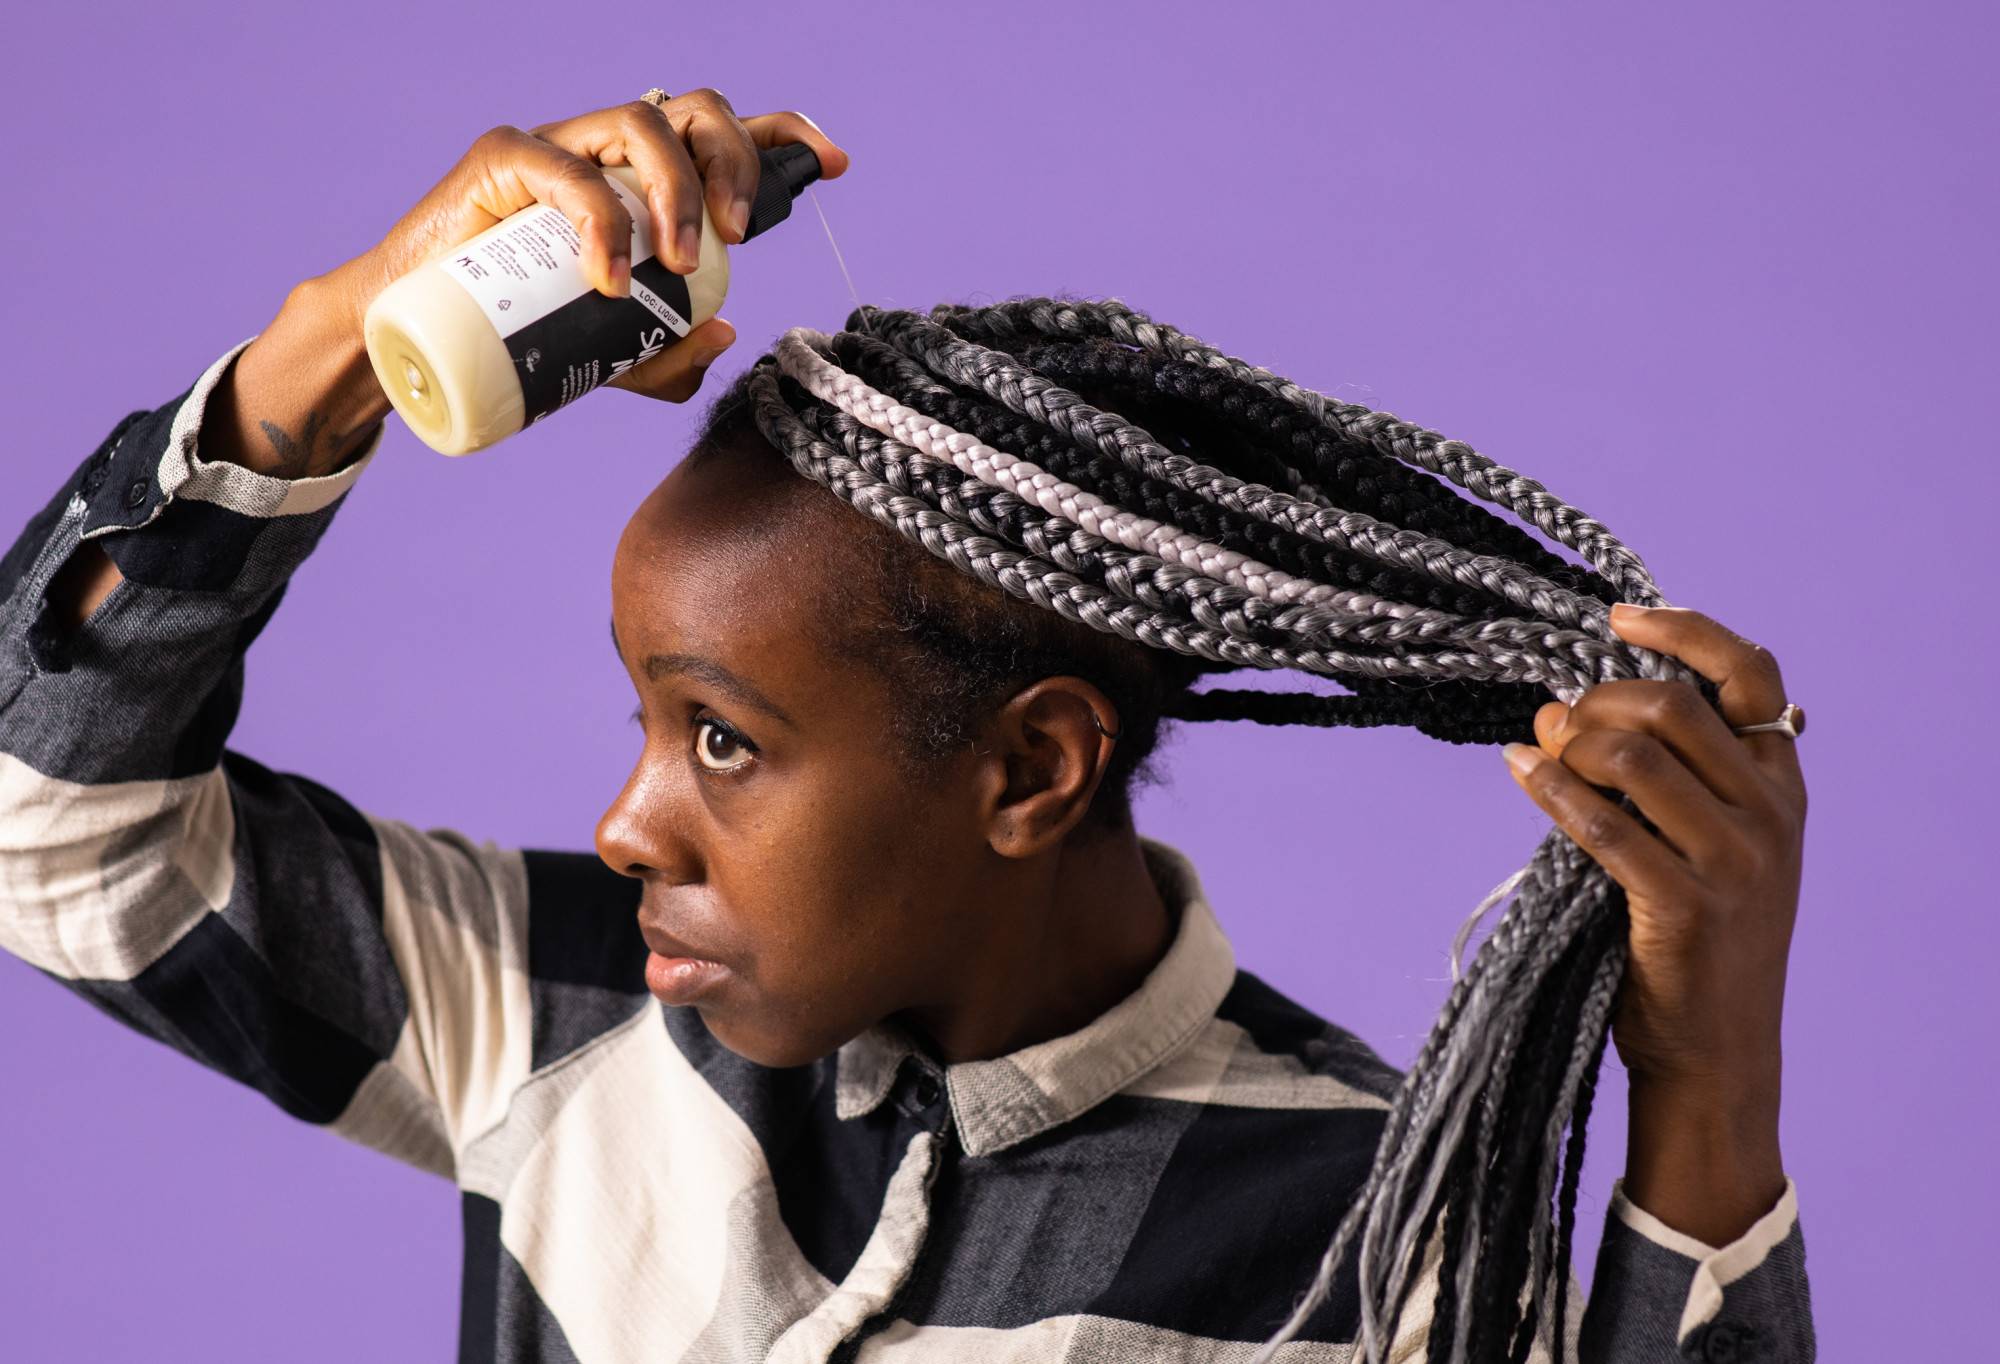 A person with long silver, grey and black braids sprays Super Milk, a light, white conditioning spray, into their roots.